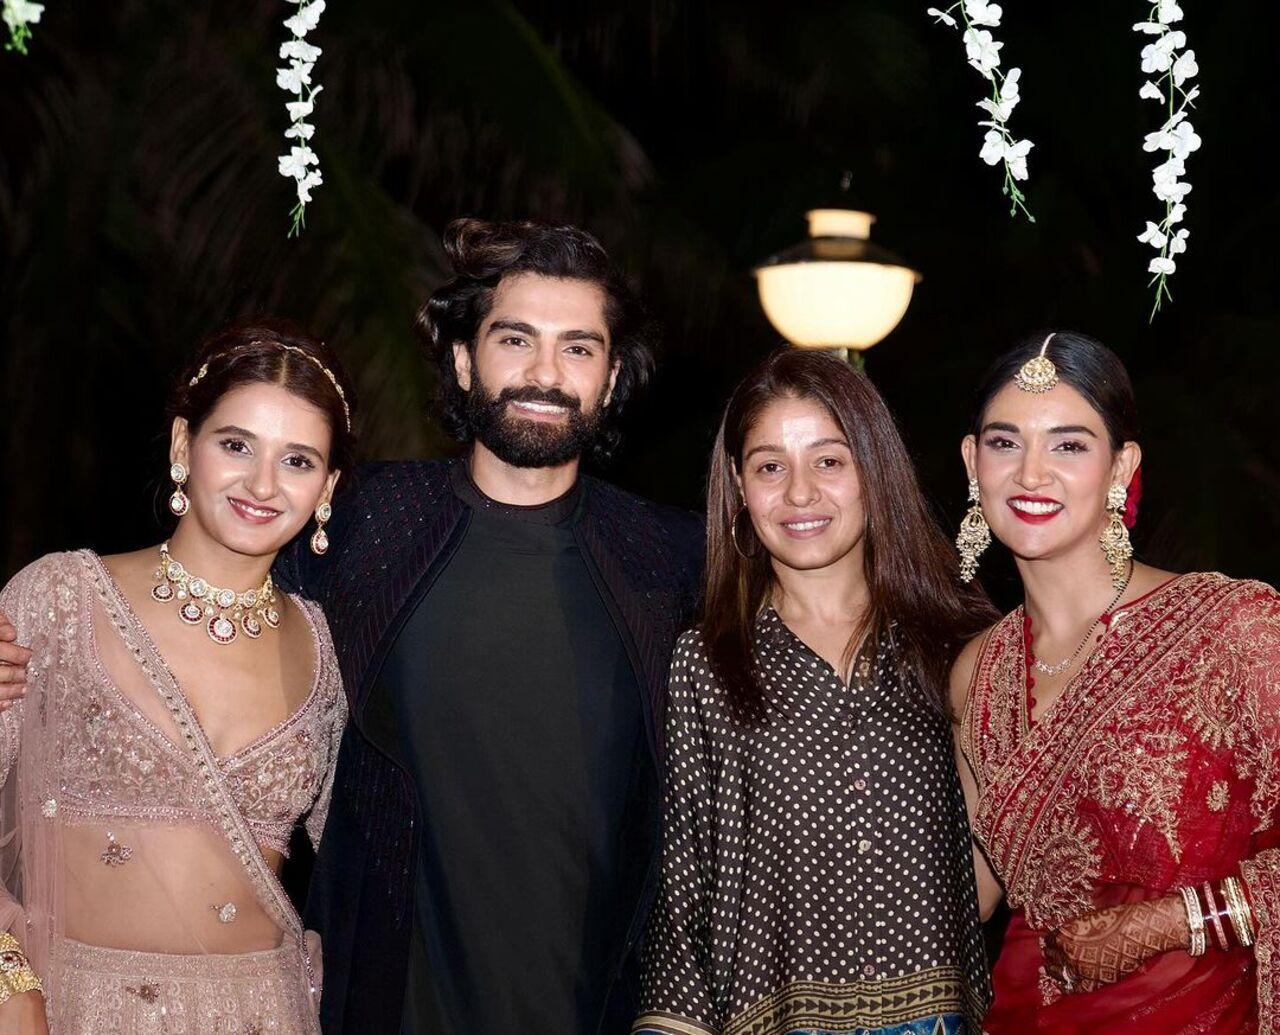 On Friday, Mukti and Kunal shared some inside pictures from their wedding festivities. Here the couple is seen posing with singer Sunidhi Chauhan